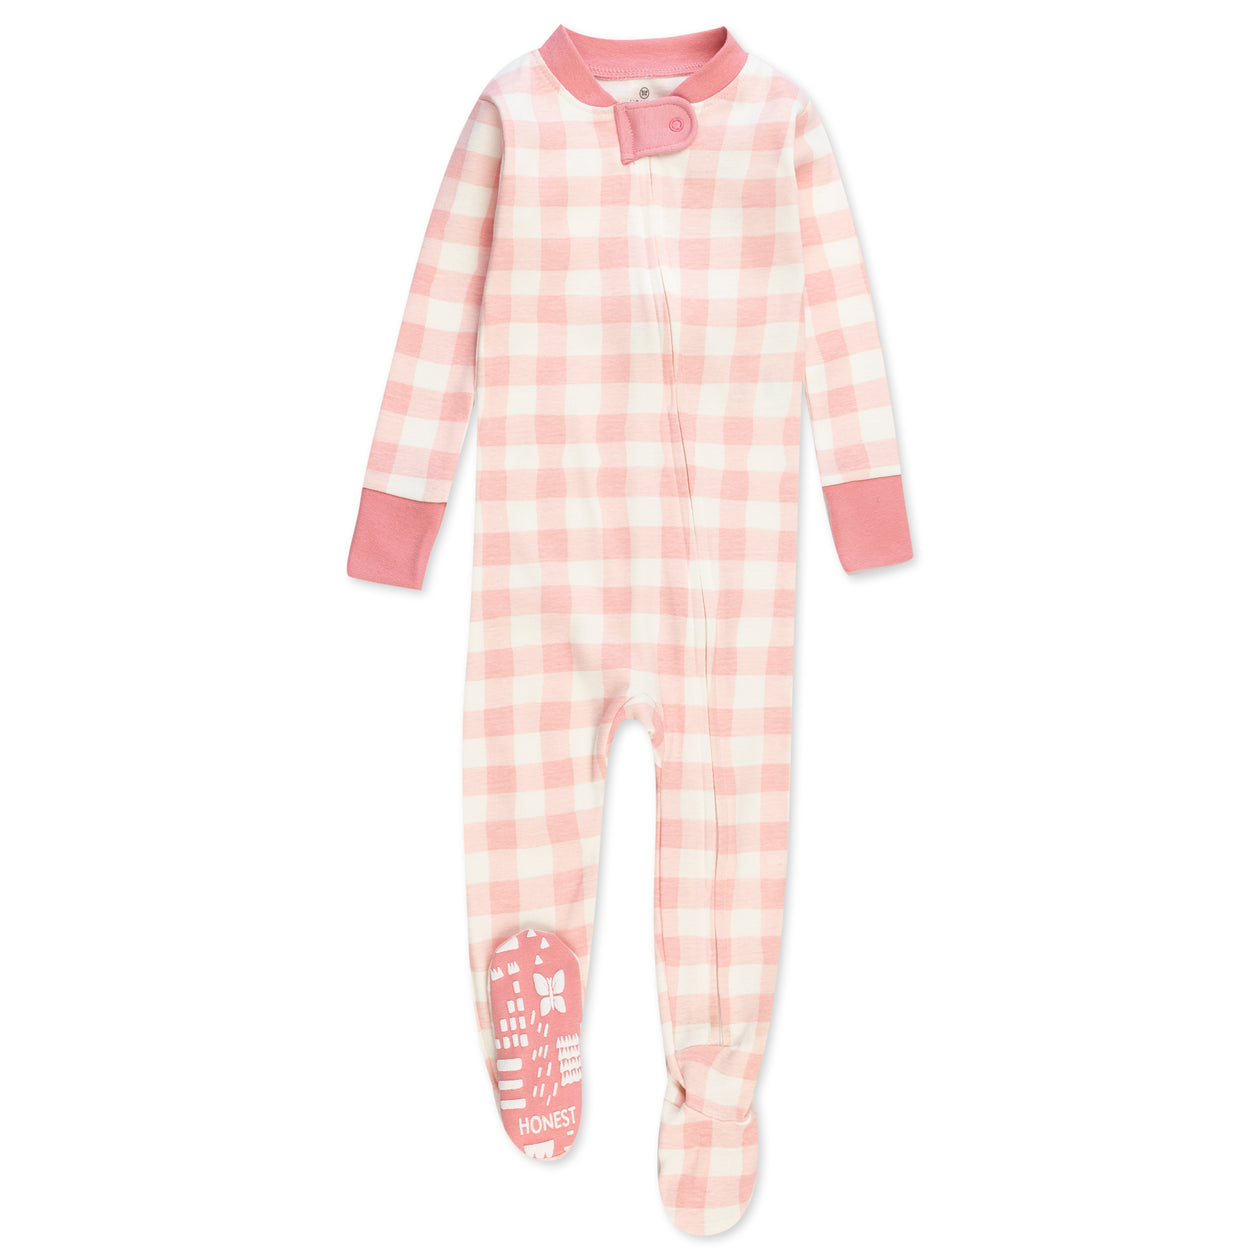 Onesies Brand Baby & Toddler Girl Snug Fit Footless Cotton Pajamas, 3-Pack  (0/3 Months - 5T)